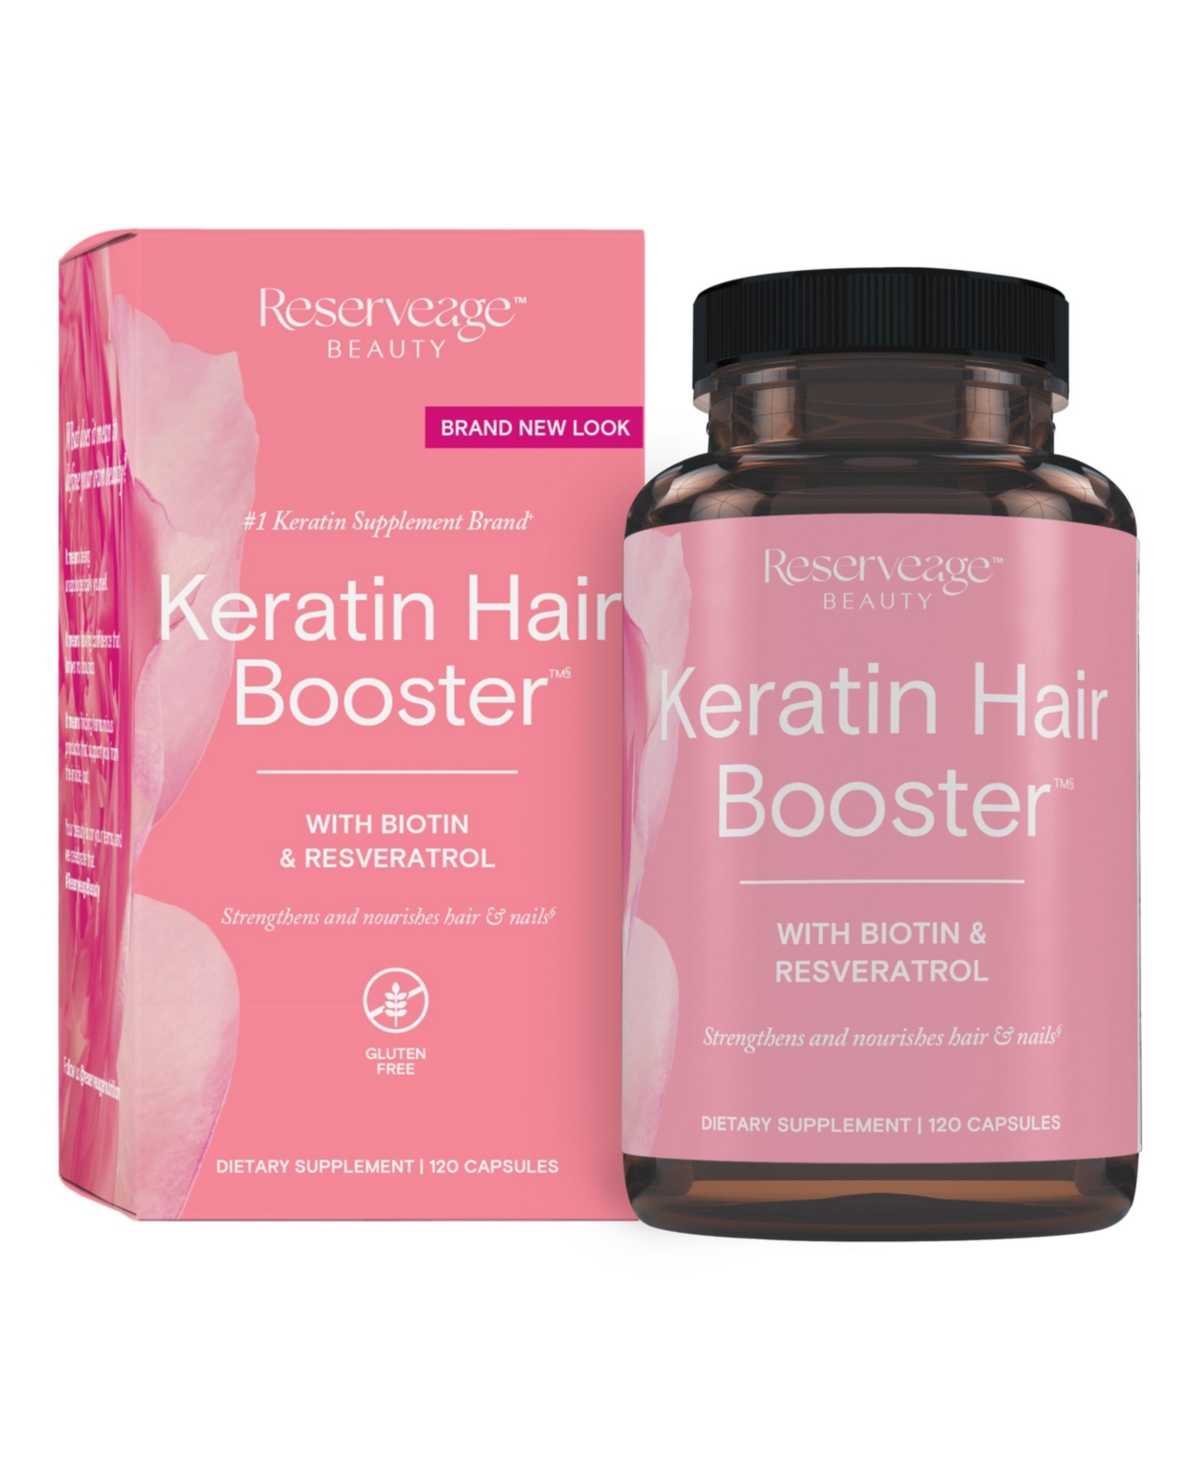 Keratin Hair Booster, Hair and Nails Supplement, Supports Healthy Thickness and Shine with Biotin, 120 Capsules (60 Servings)